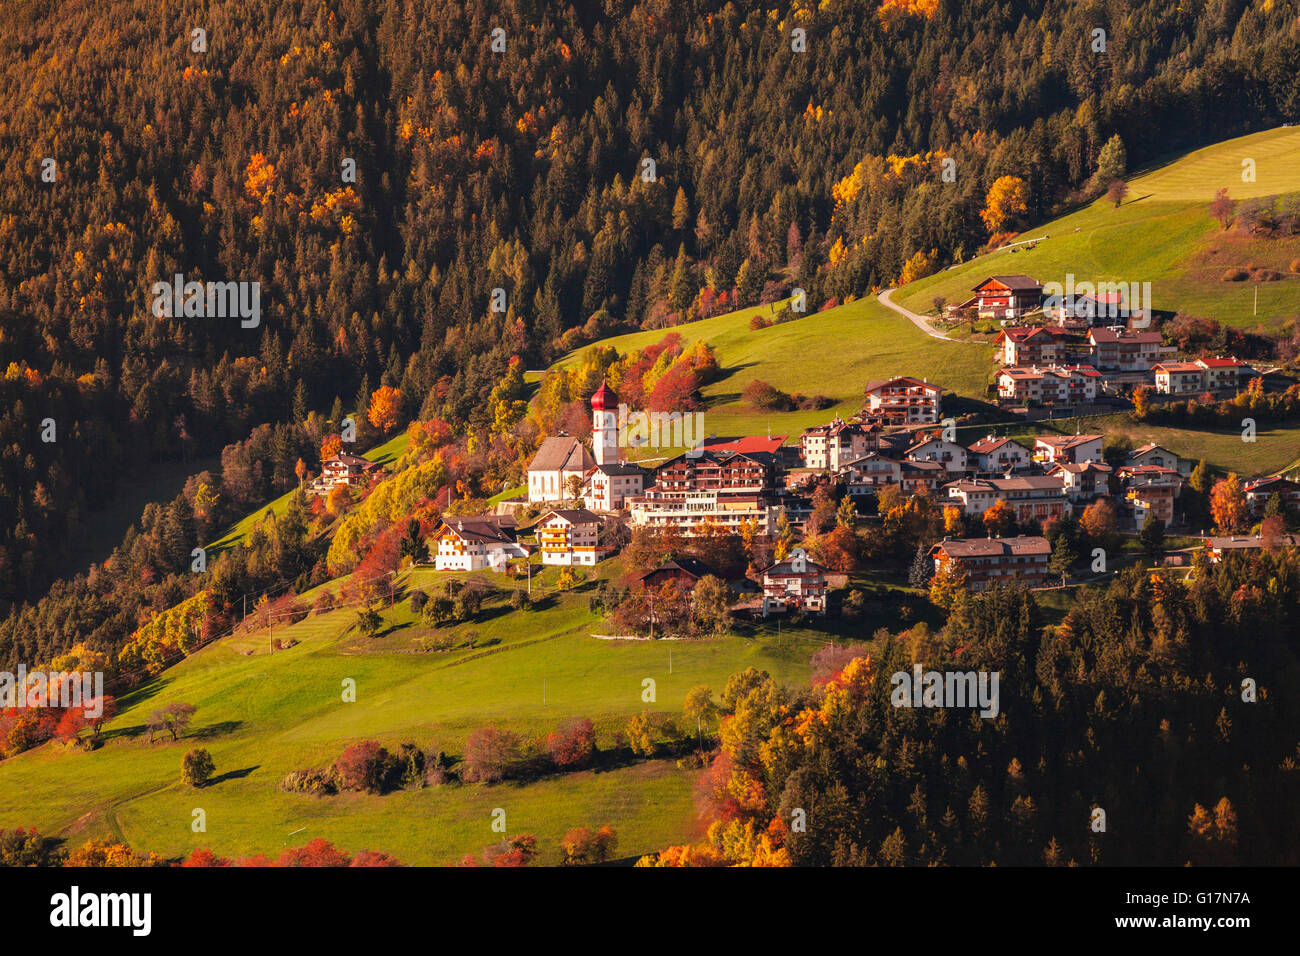 Small town, Dolomites, Italy, taken from helicopter Stock Photo